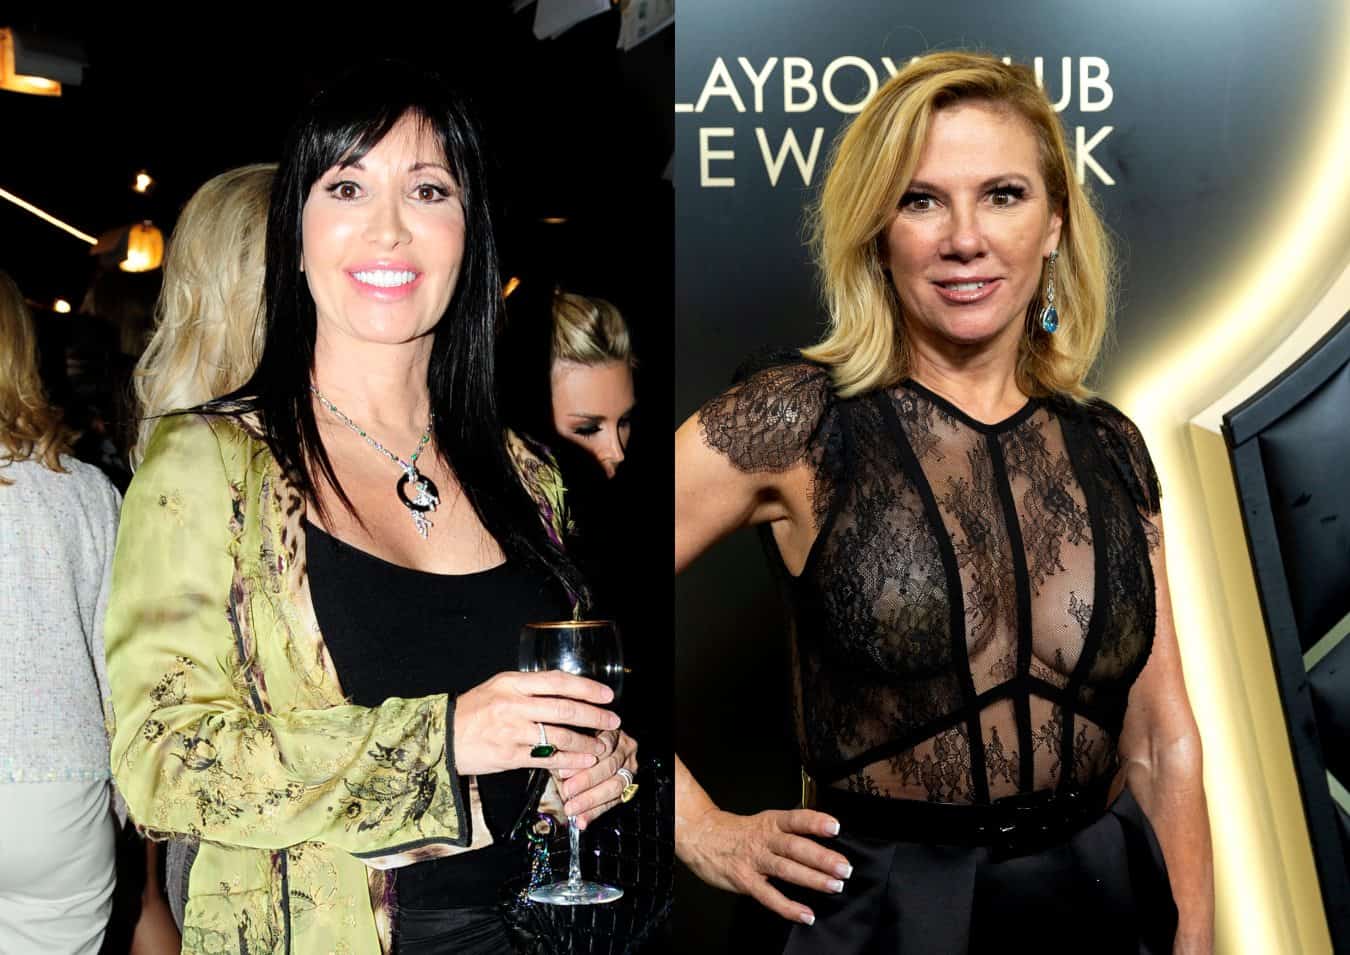 Elyse Slaine Claims Ramona Singer ‘Faked Her Tears’ in This RHONY Scene, Dishes on What Ramona Won't Talk About on the Show and Suggests She Exposed Her to COVID-19